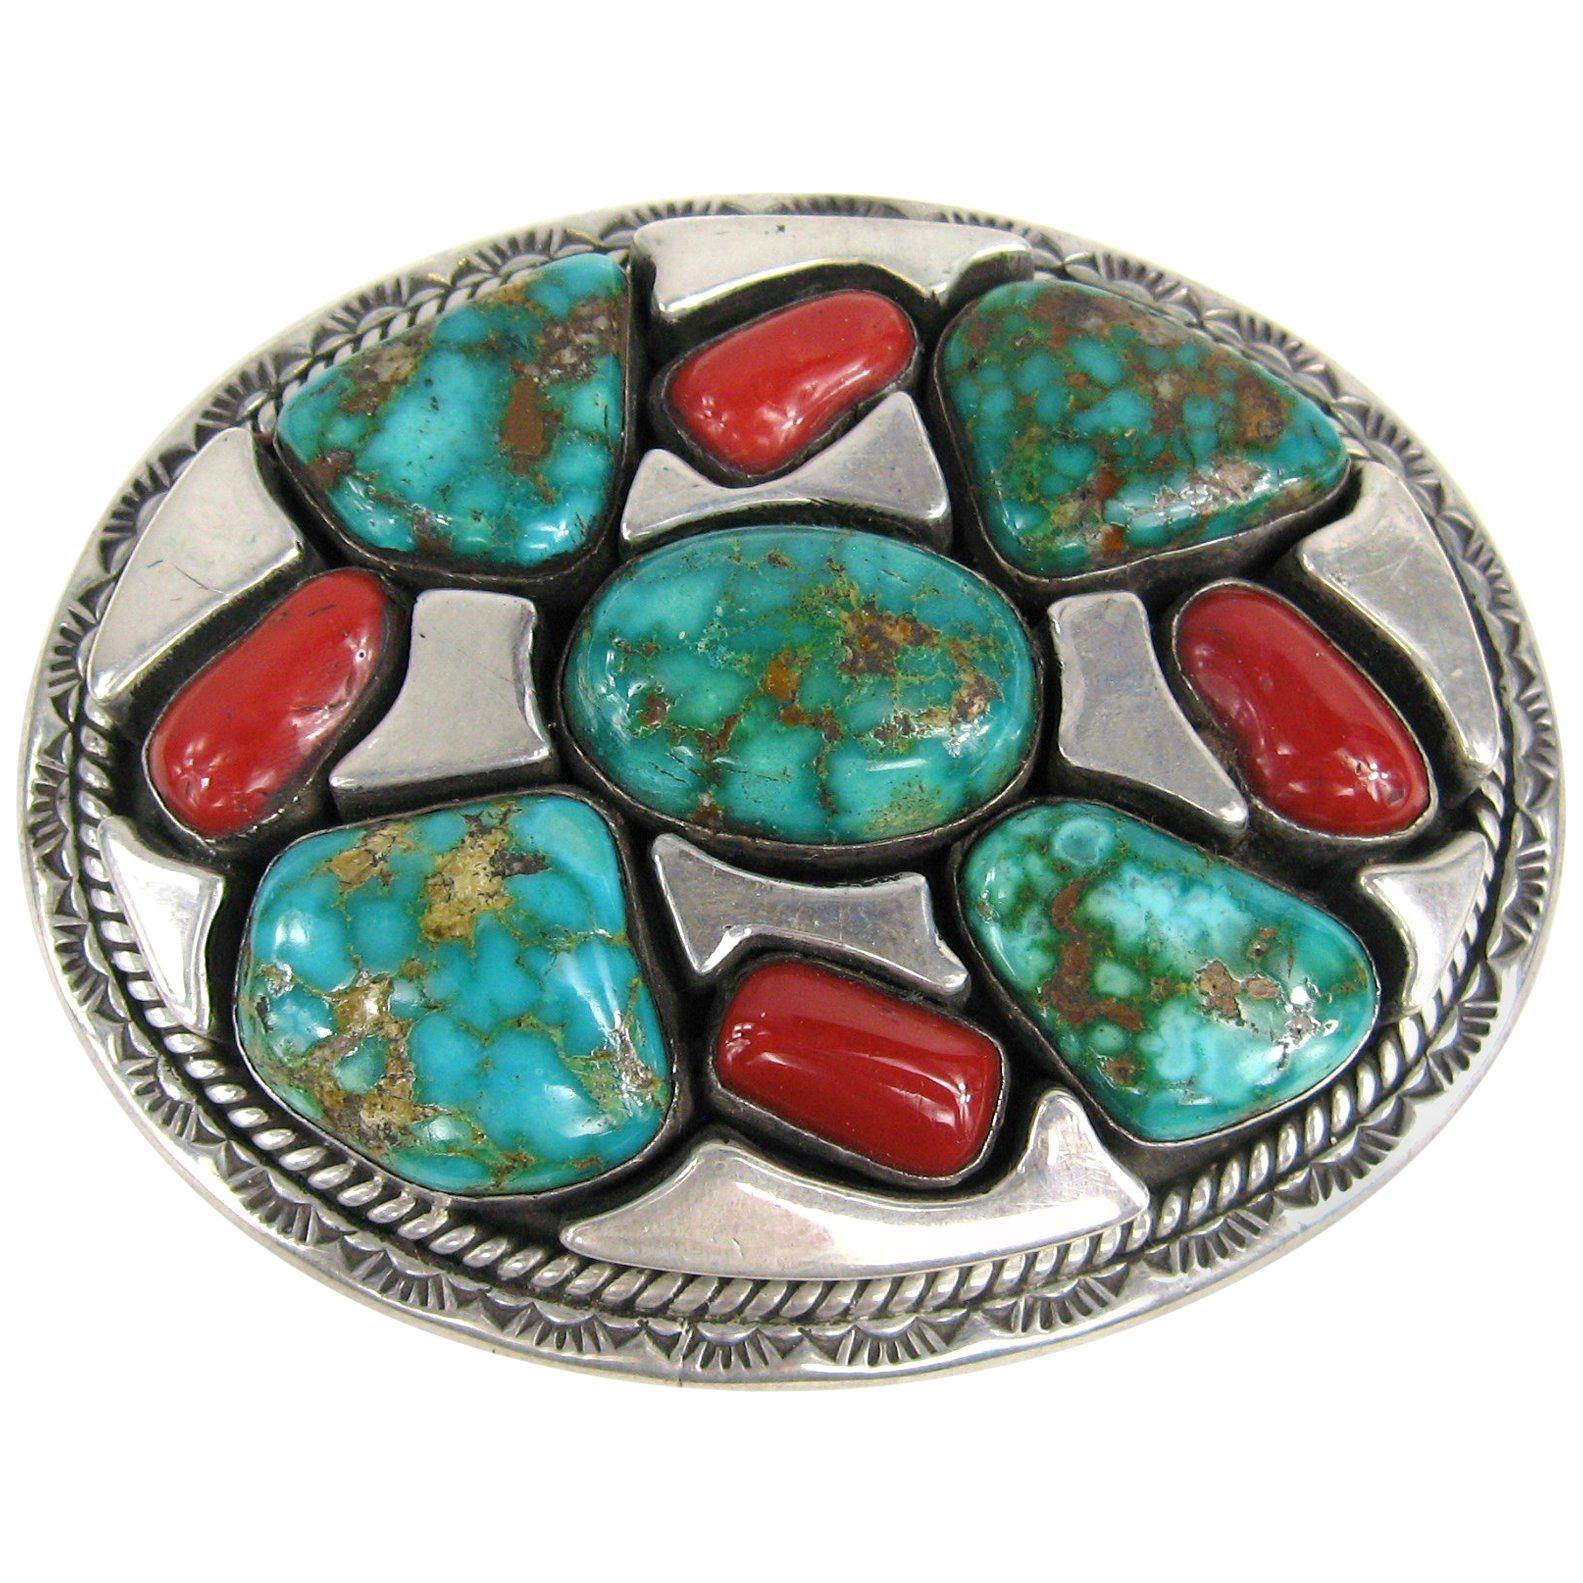  Sterling Silver Native American Turquoise and Coral Belt Buckle by Vandever For Sale